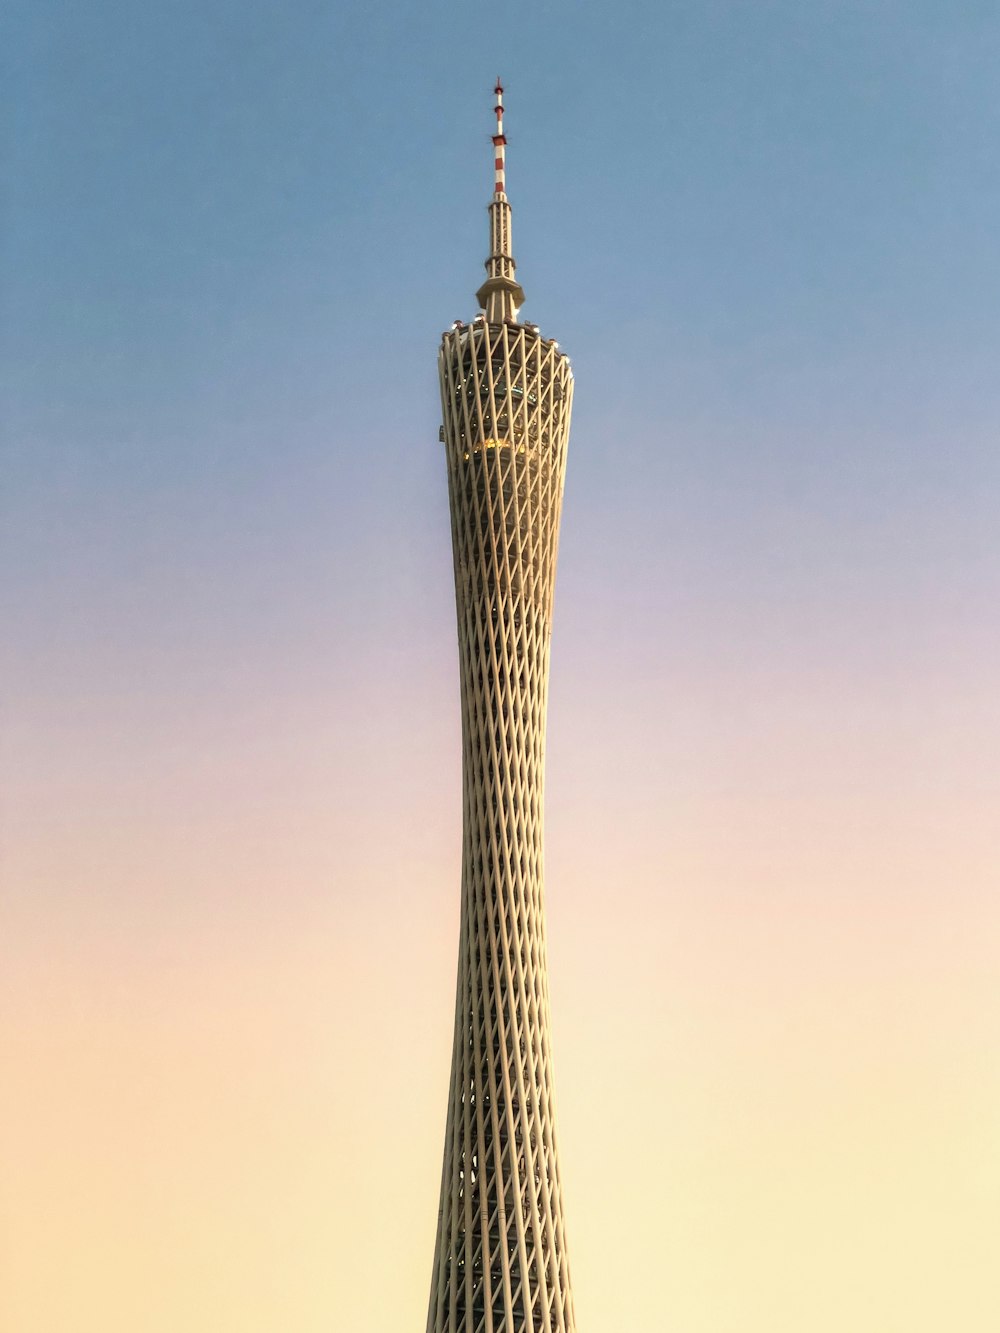 a tall pointy tower with a clear sky